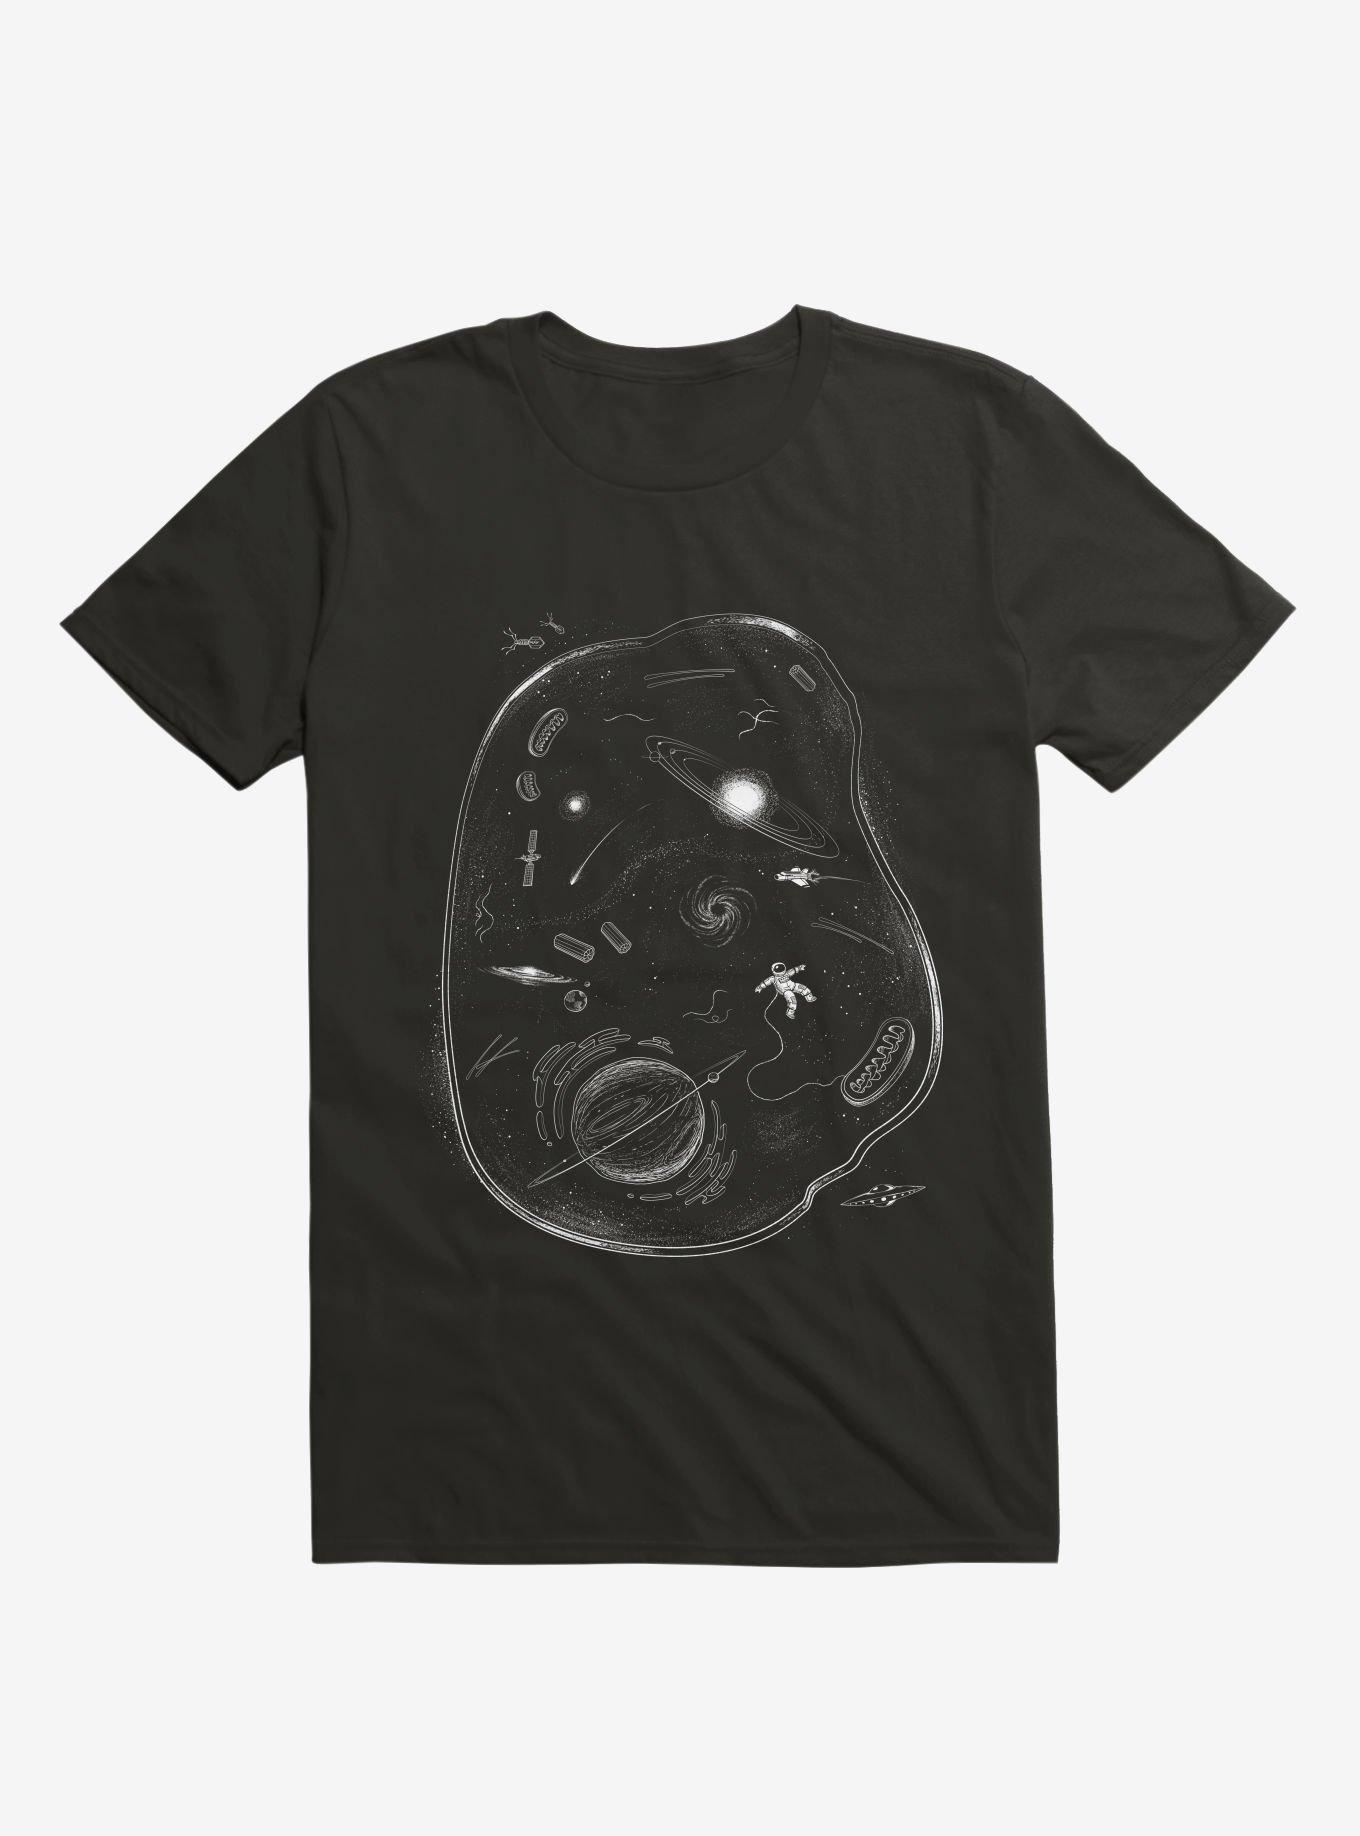 We Are Made Of Stars Black T-Shirt